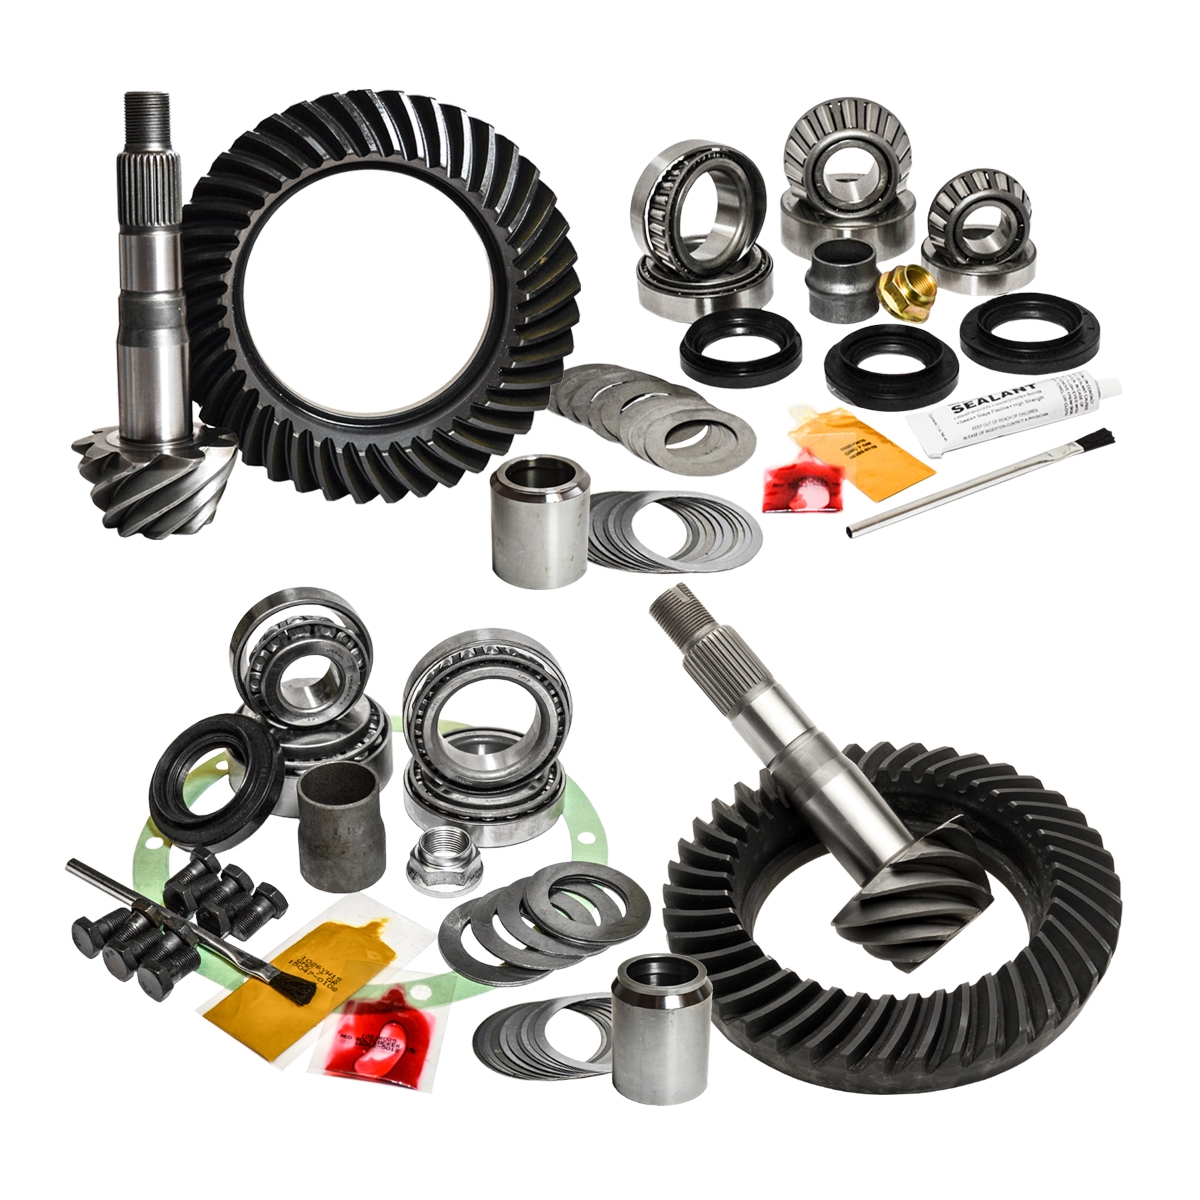 VMN offers Nitro complete regearing kits composed of front and rear ring with pinion